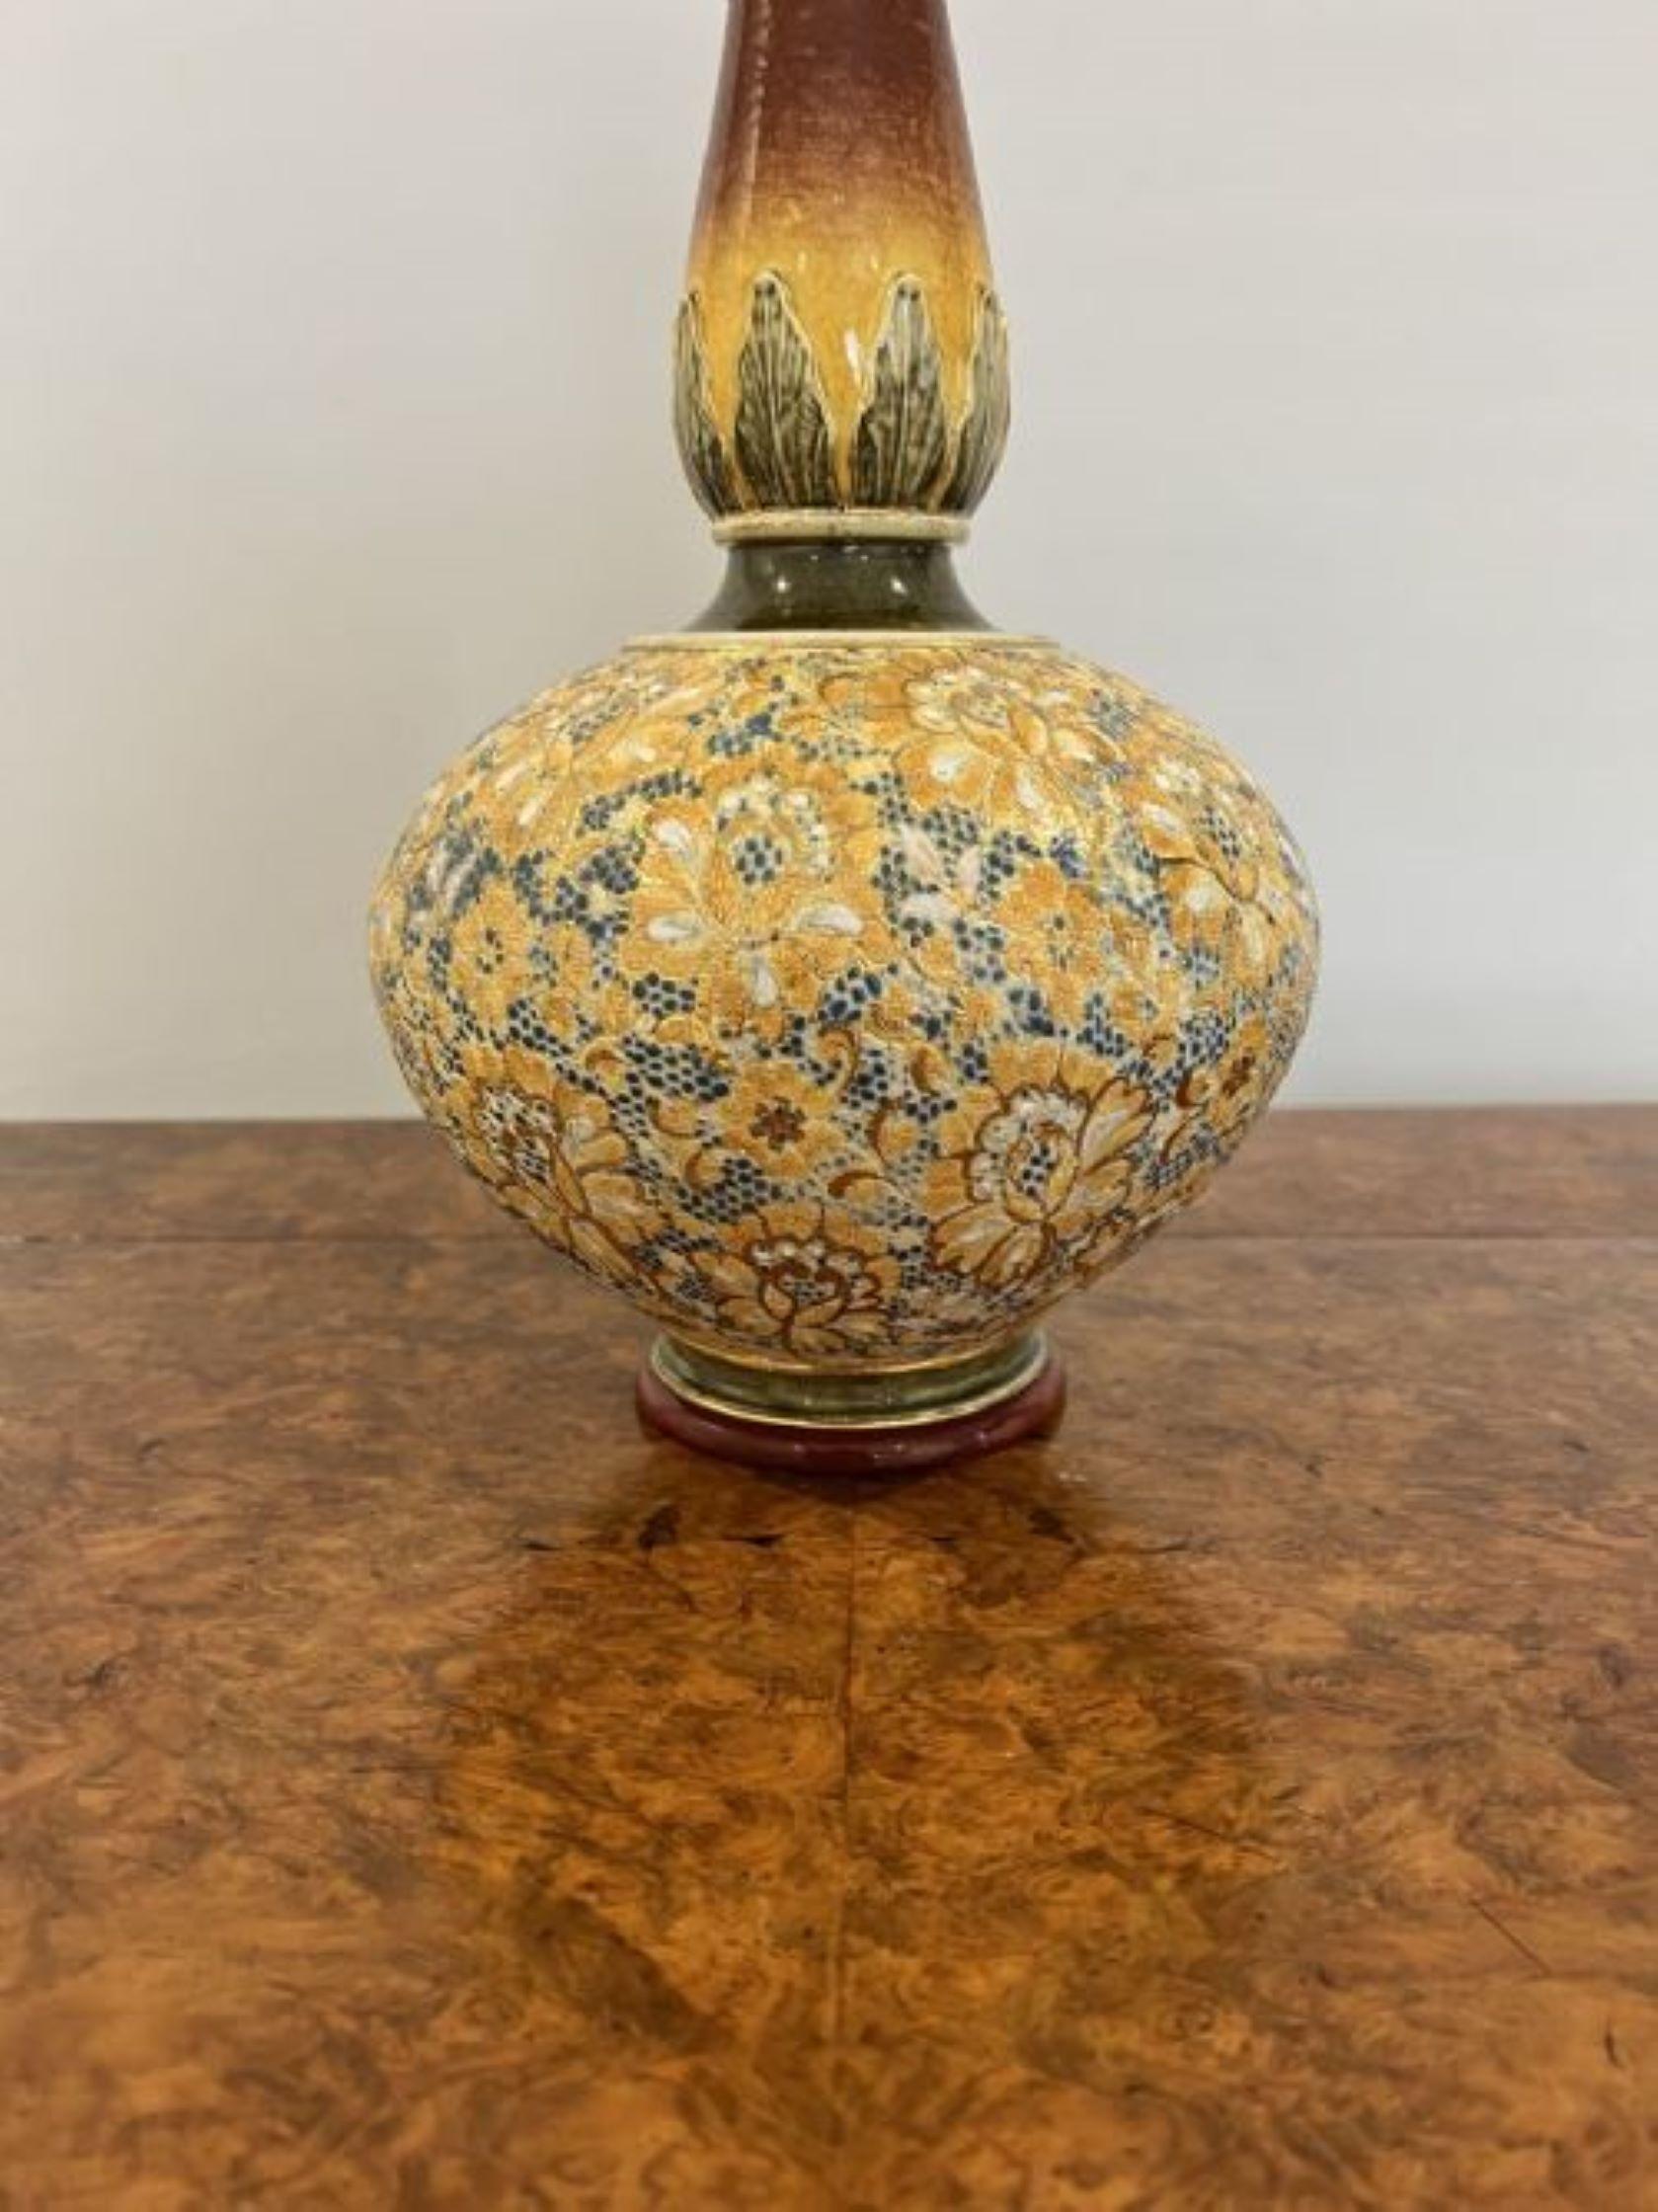 Fantastic quality large antique Victorian Doulton Lambeth Slater's Patent vase having a fantastic quality large vase with a tapering neck, red and orange glaze to the vase above a bulbous body decorated with white and gold flowers on a turquoise